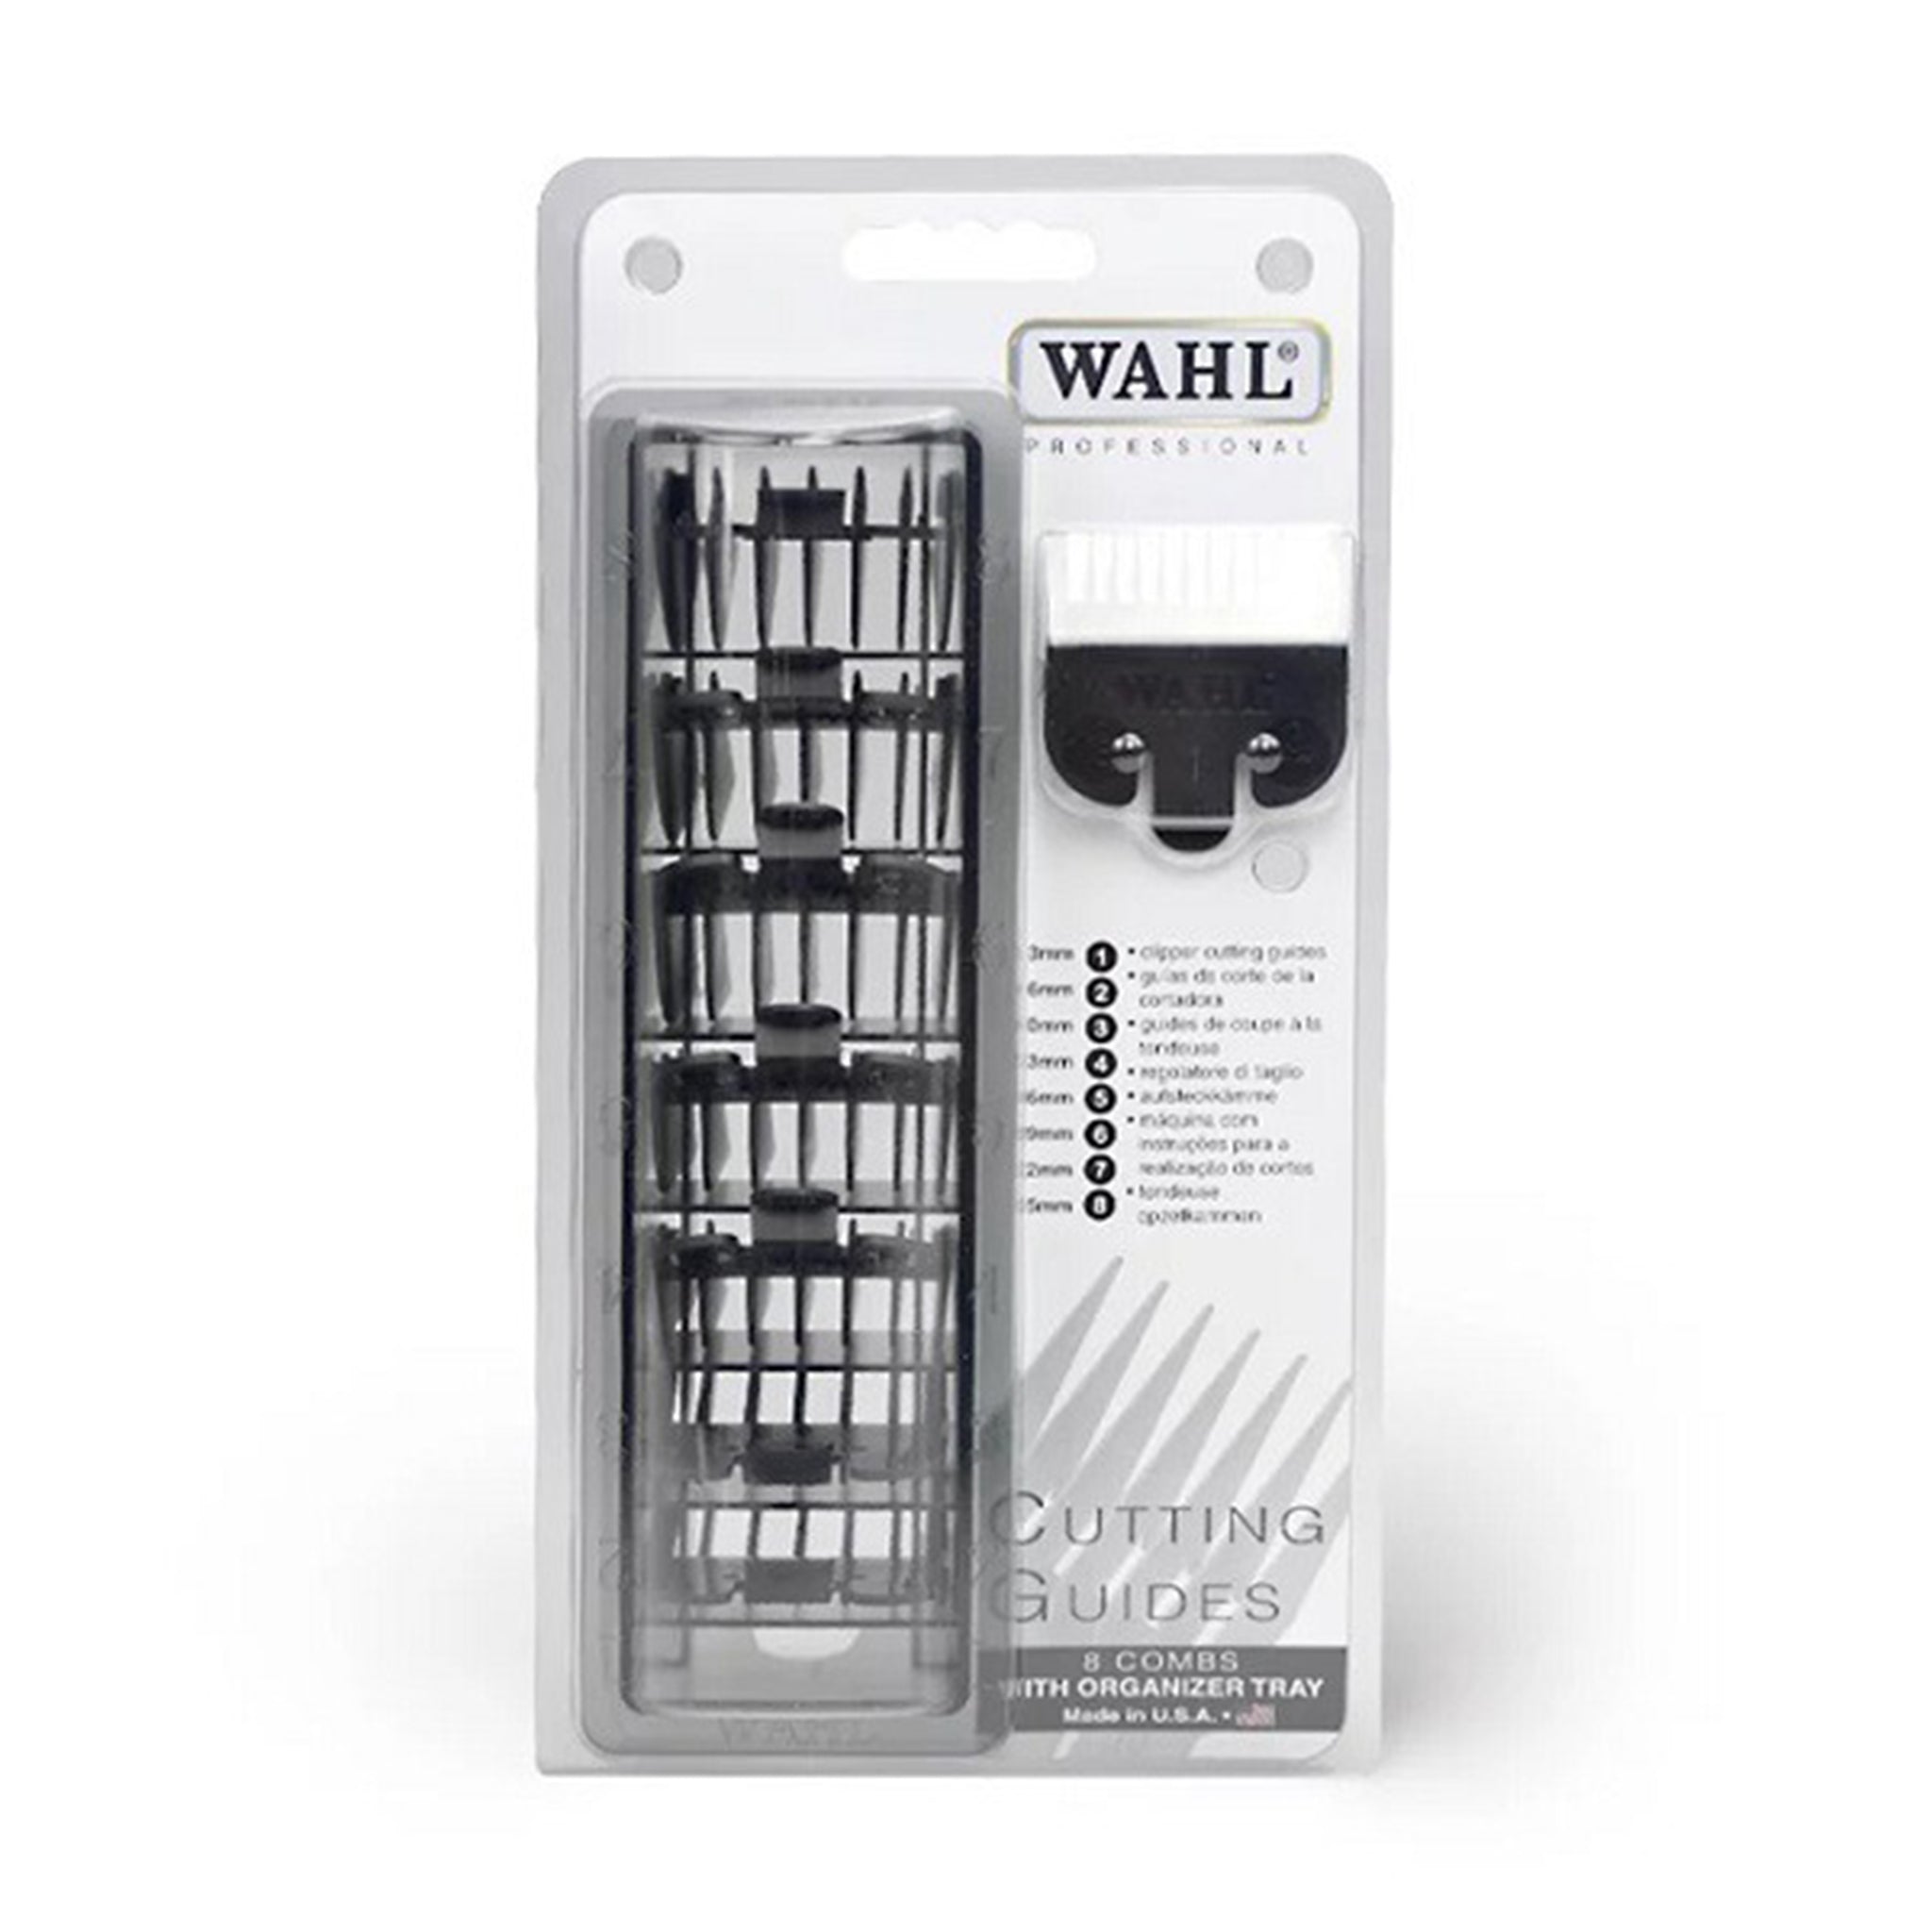 Wahl Cutting Guides 1-8 (with organising tray)